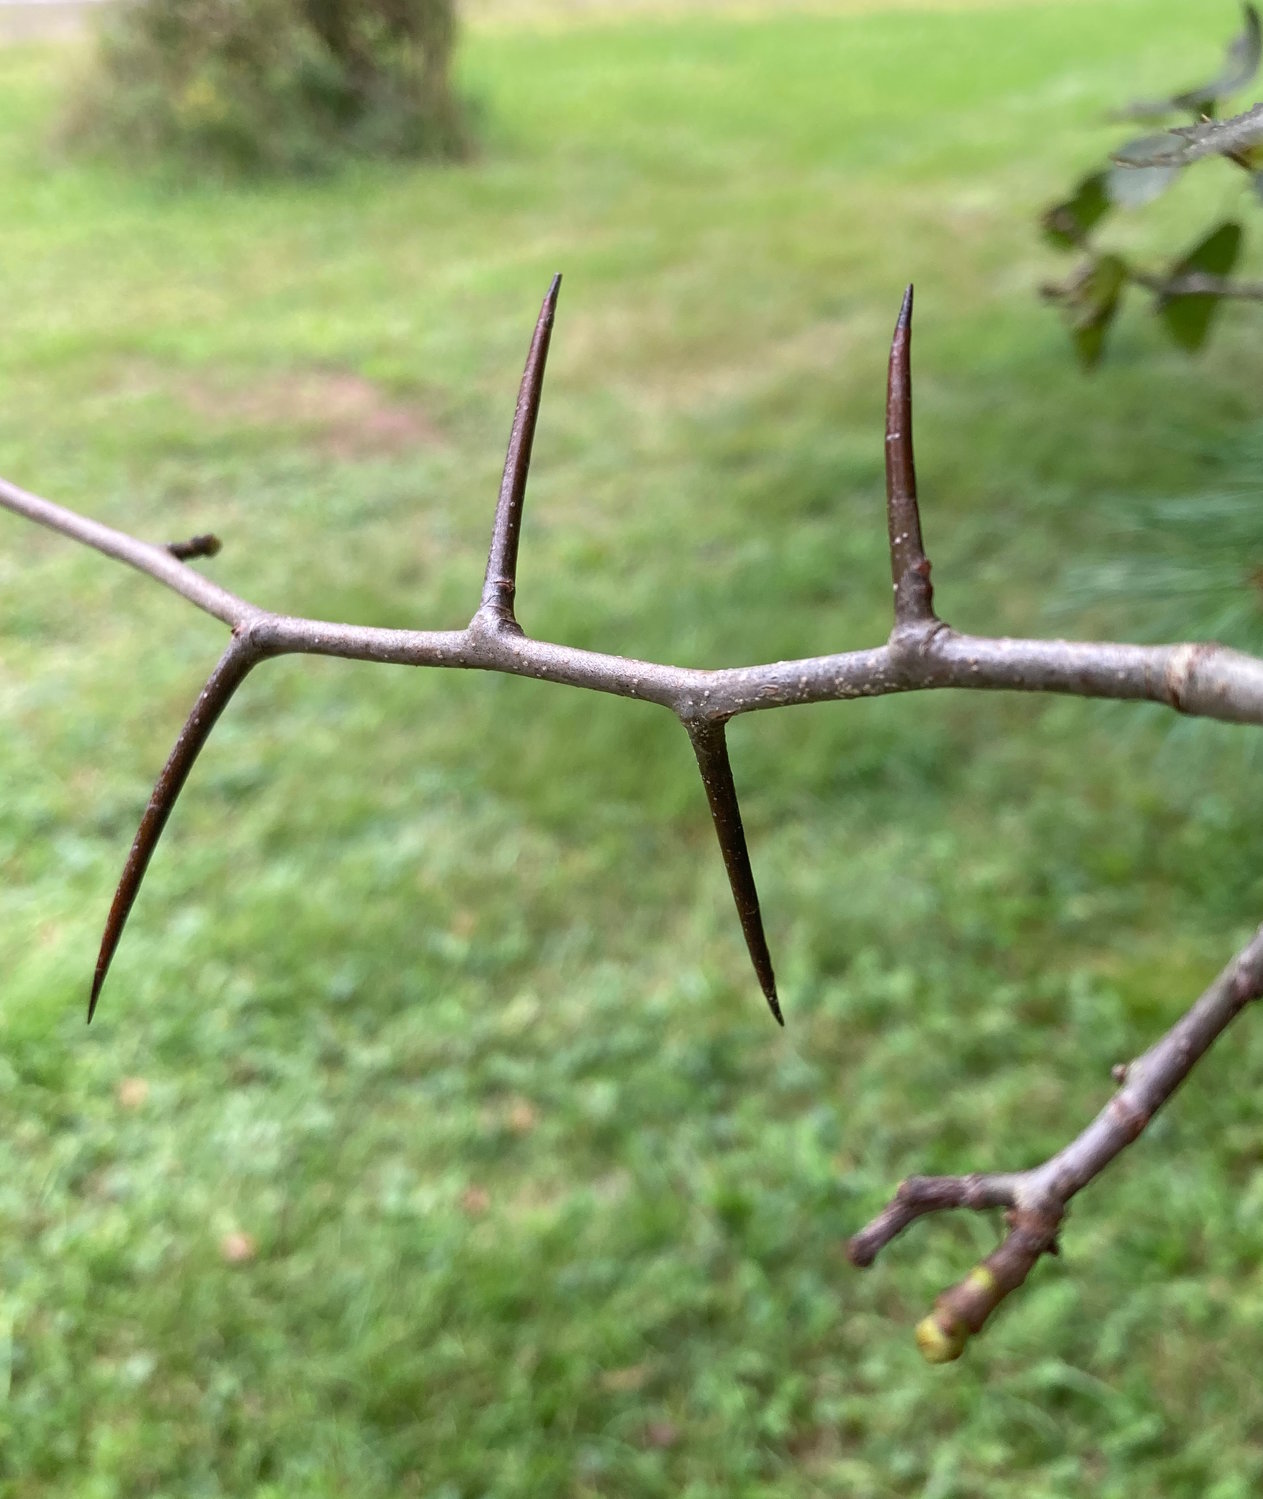 Most hawthorn species sport thorns, leading to the past practice of planting hedges to establish boundaries. The thorns were also used as fishing hooks and sewing needles in days gone by.